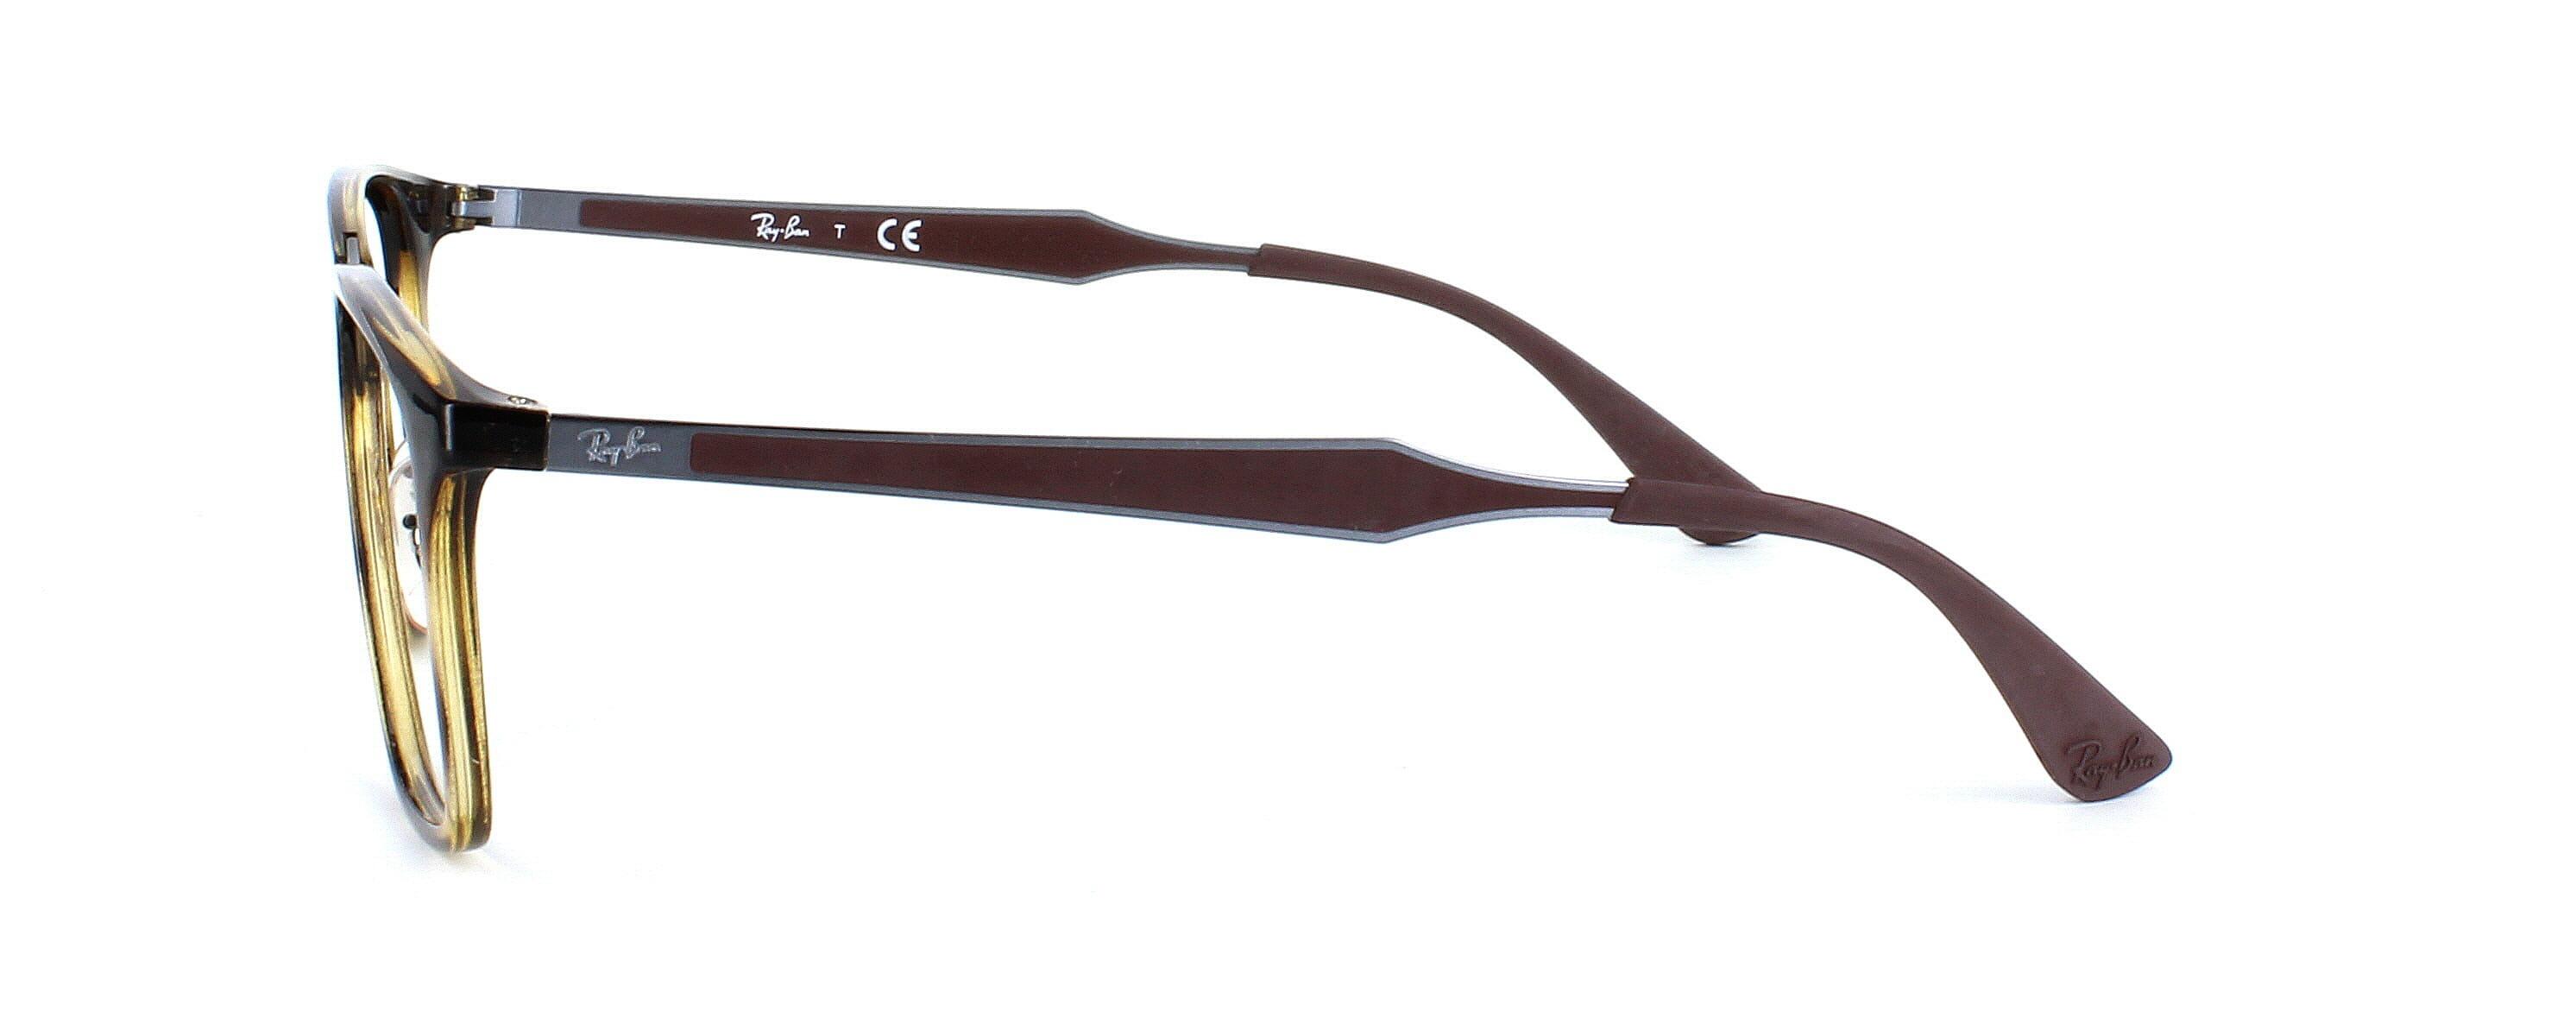 Ray Ban 7131 - Gent's tortoise acetate with metal nose bridge - image view 3